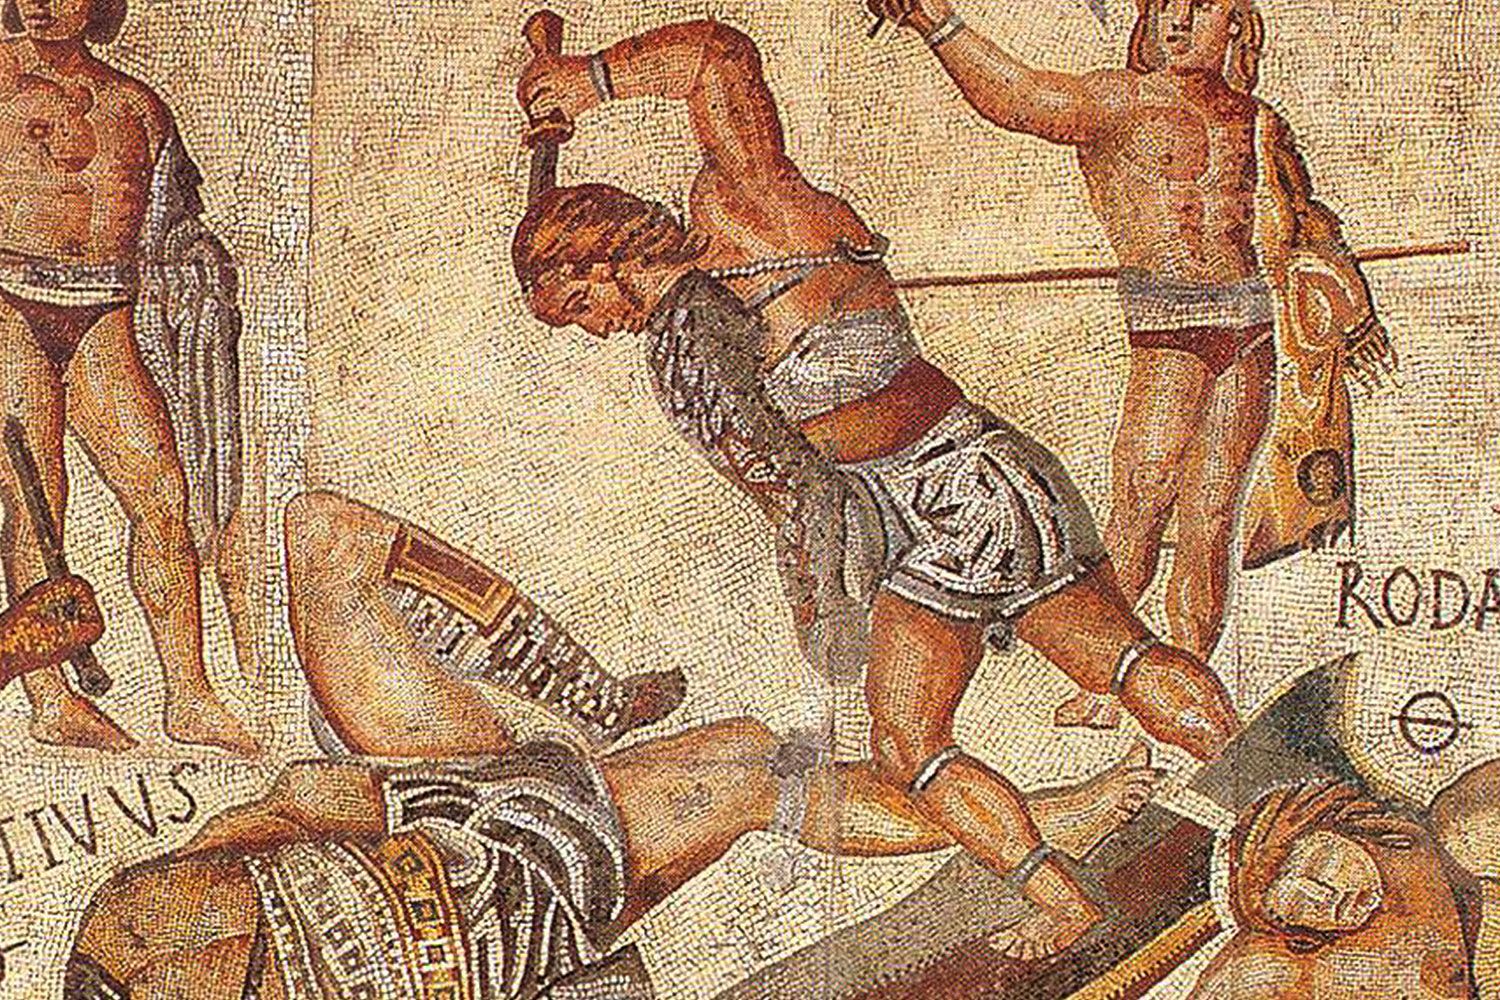 Second century AD mosaic of gladiators in the Colosseum